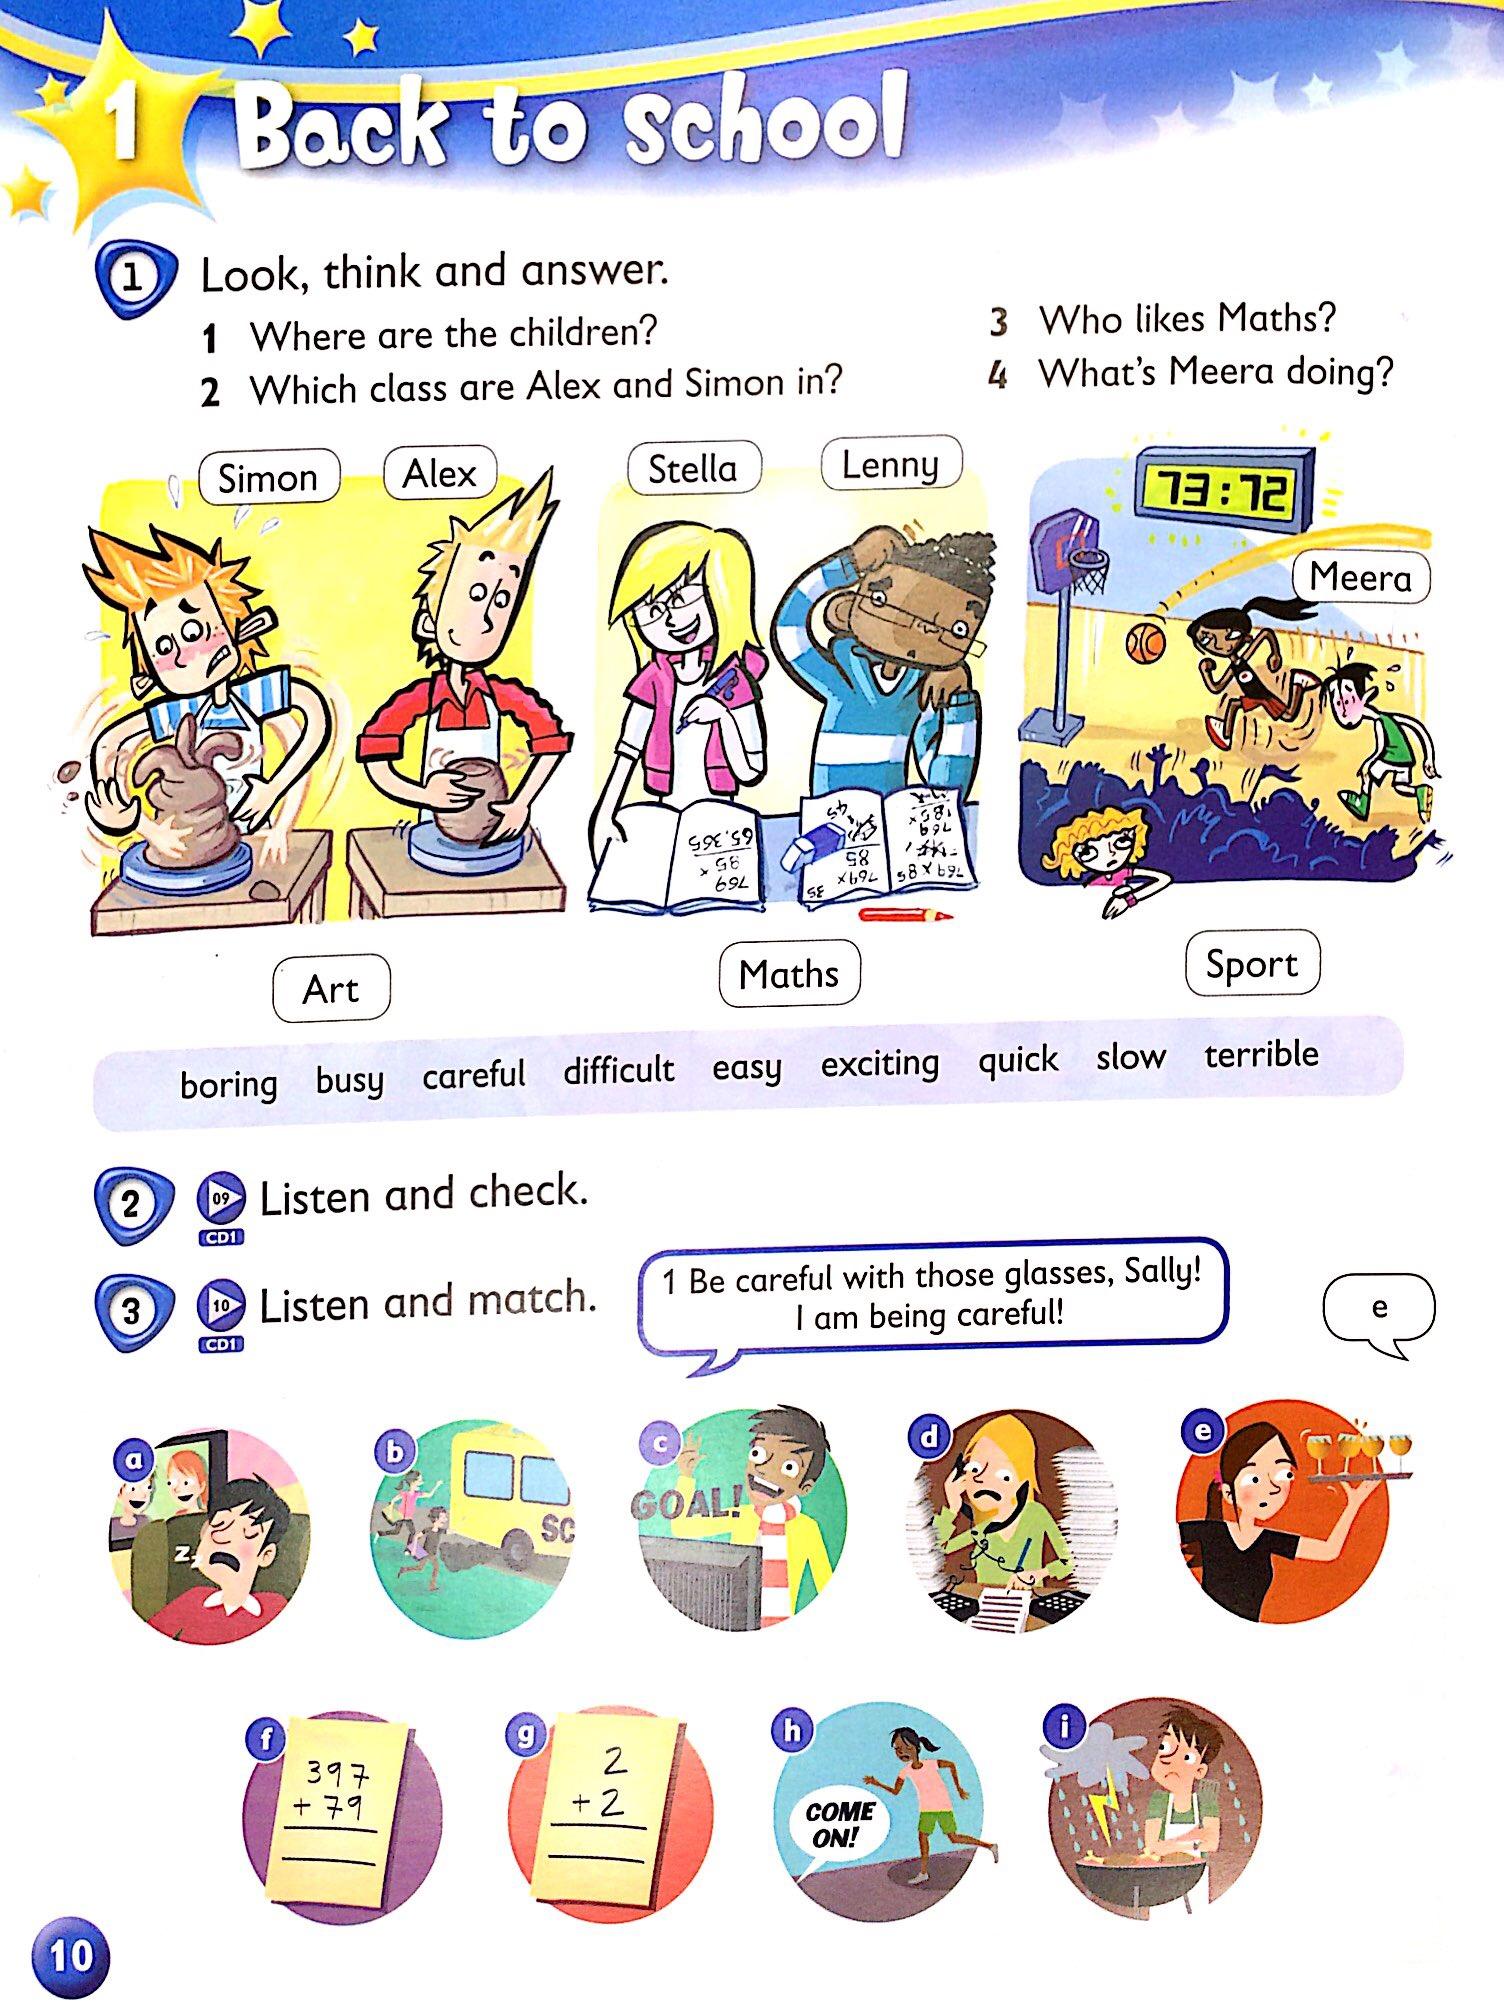 Kid's Box Second edition Pupil's Book Level 4